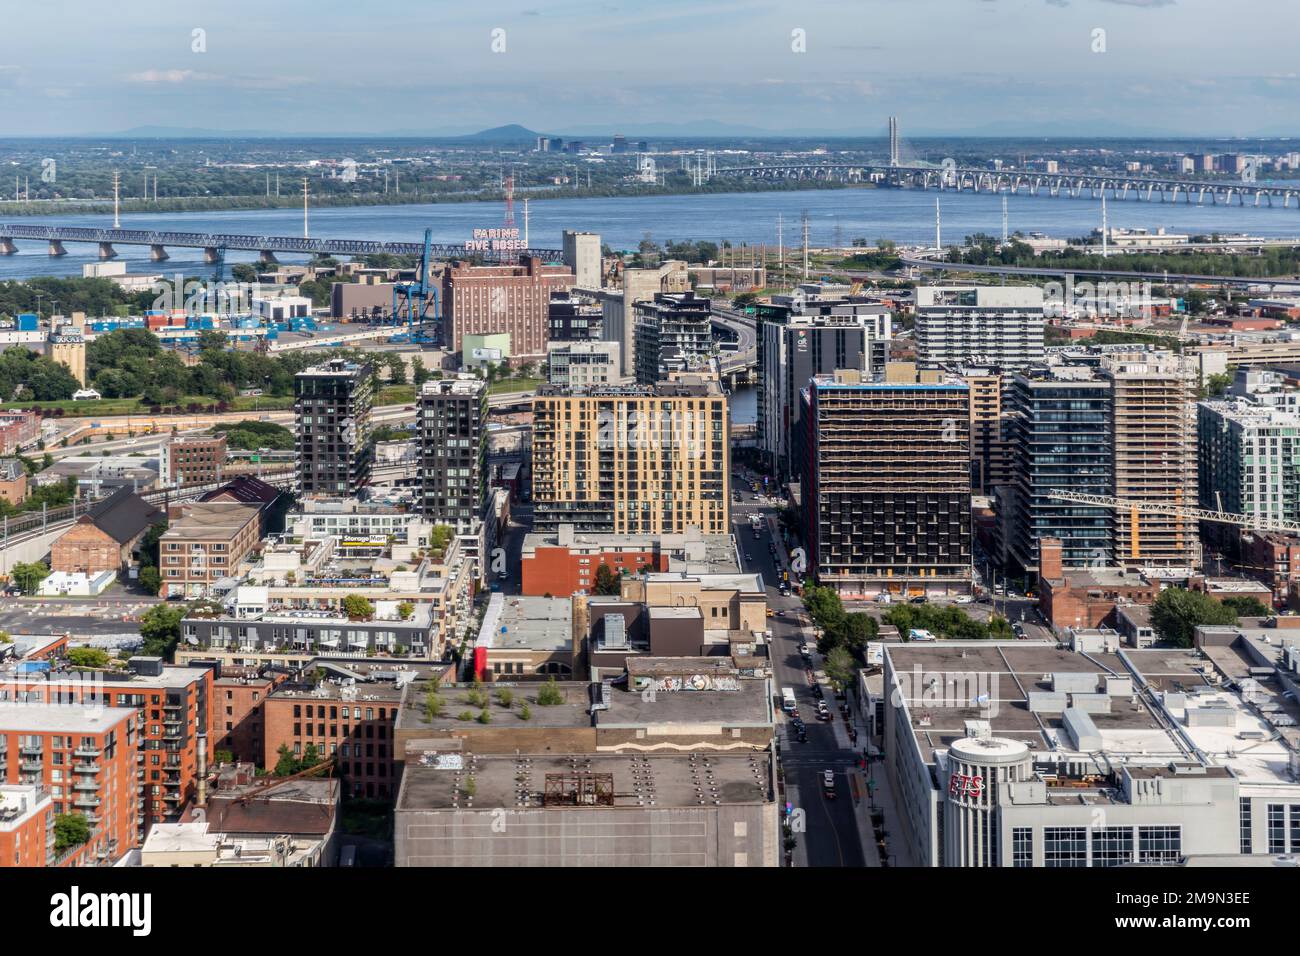 An aerial view of Montreal with Habitat 67 and the Samuel Champlain Bridge in the distance. Quebec, Canada Stock Photo